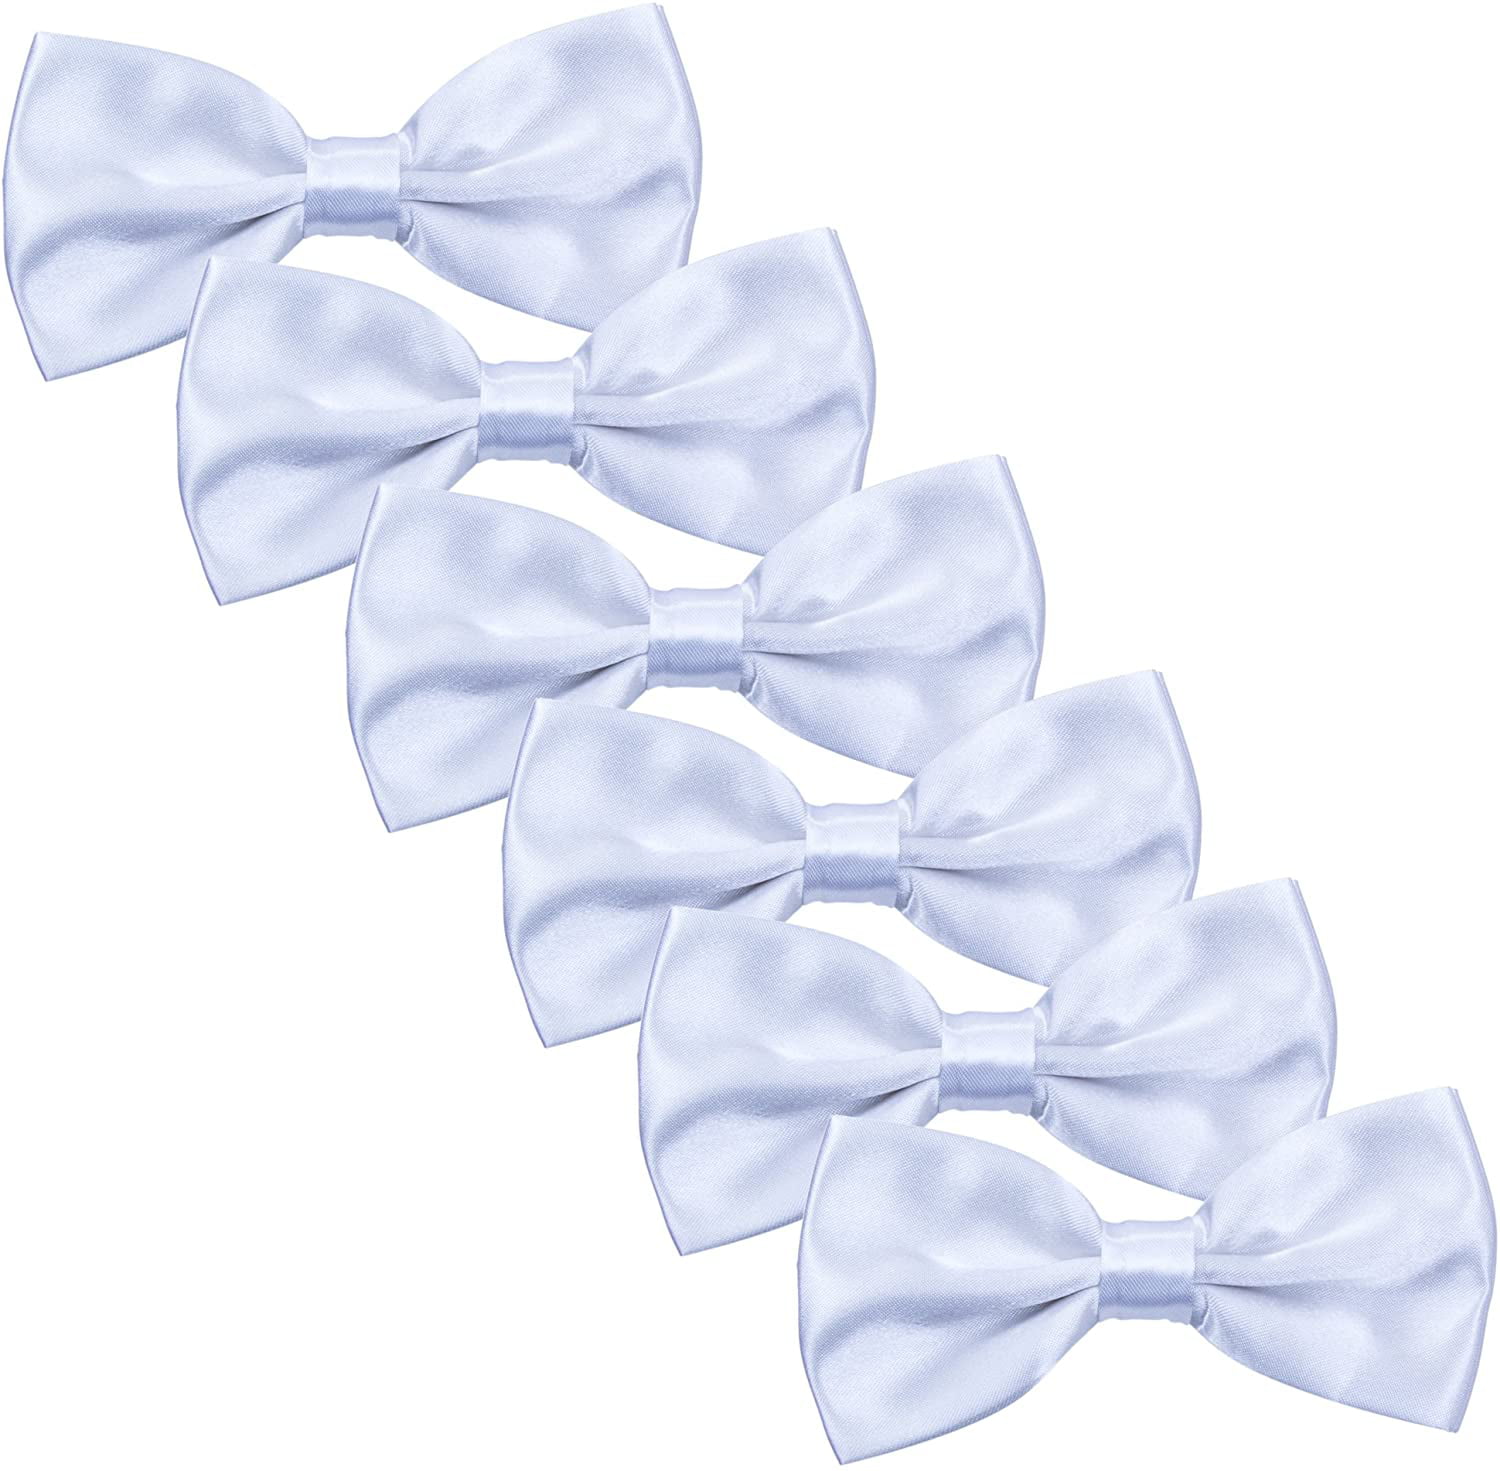 Solid Color Adjustable Pre Tied Bowties Details about   6PCS Men's Bow Tie for Wedding Party 